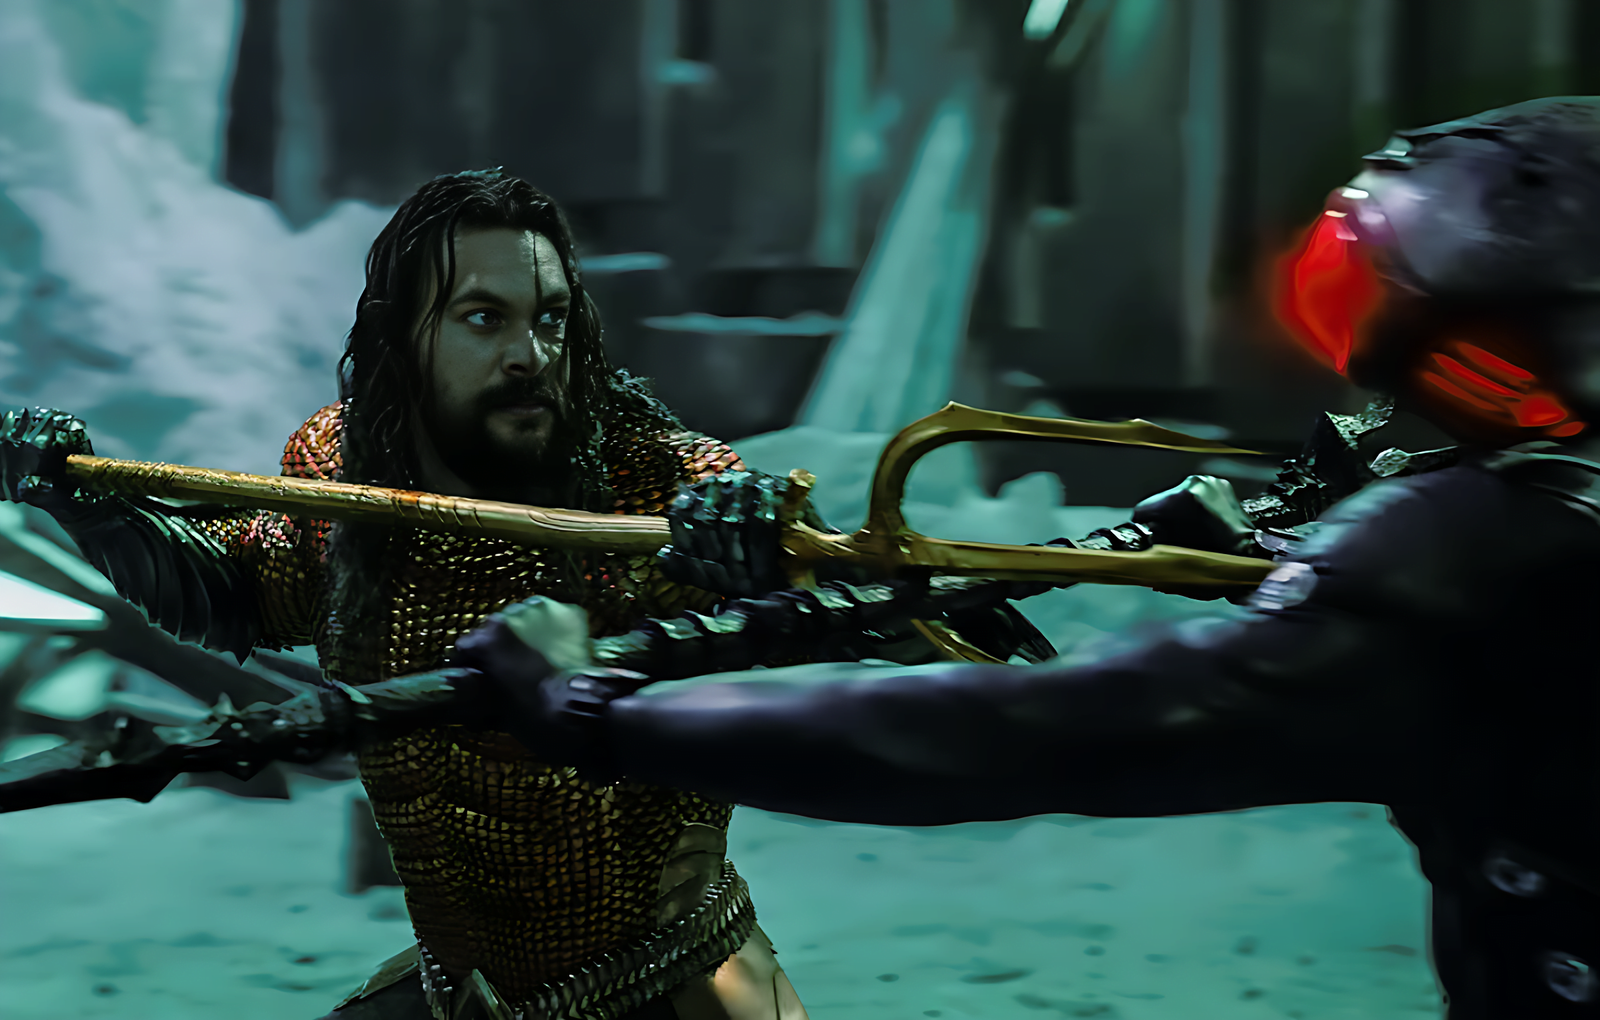 Aquaman 2: Delving into the Depths of Destiny on December 22